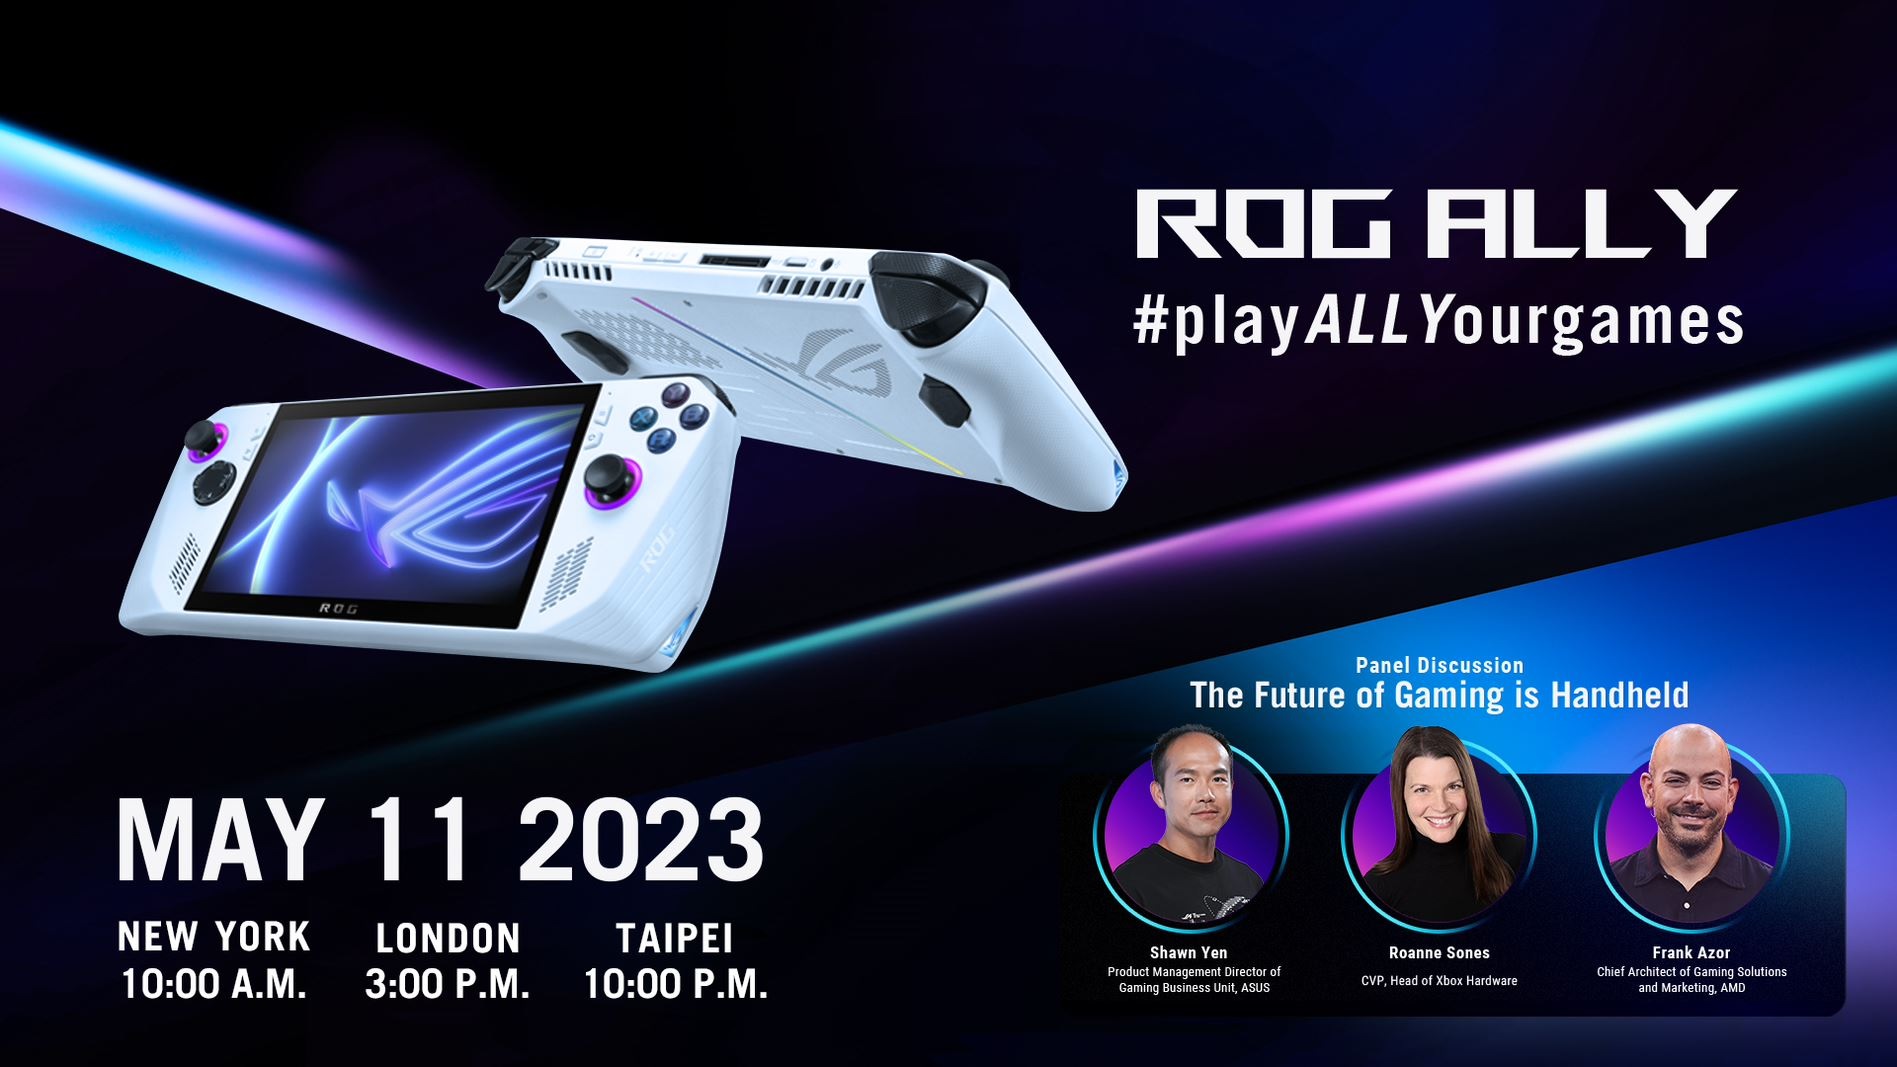 ROG Ally launch event confirmed for May 11th, price and specs to be